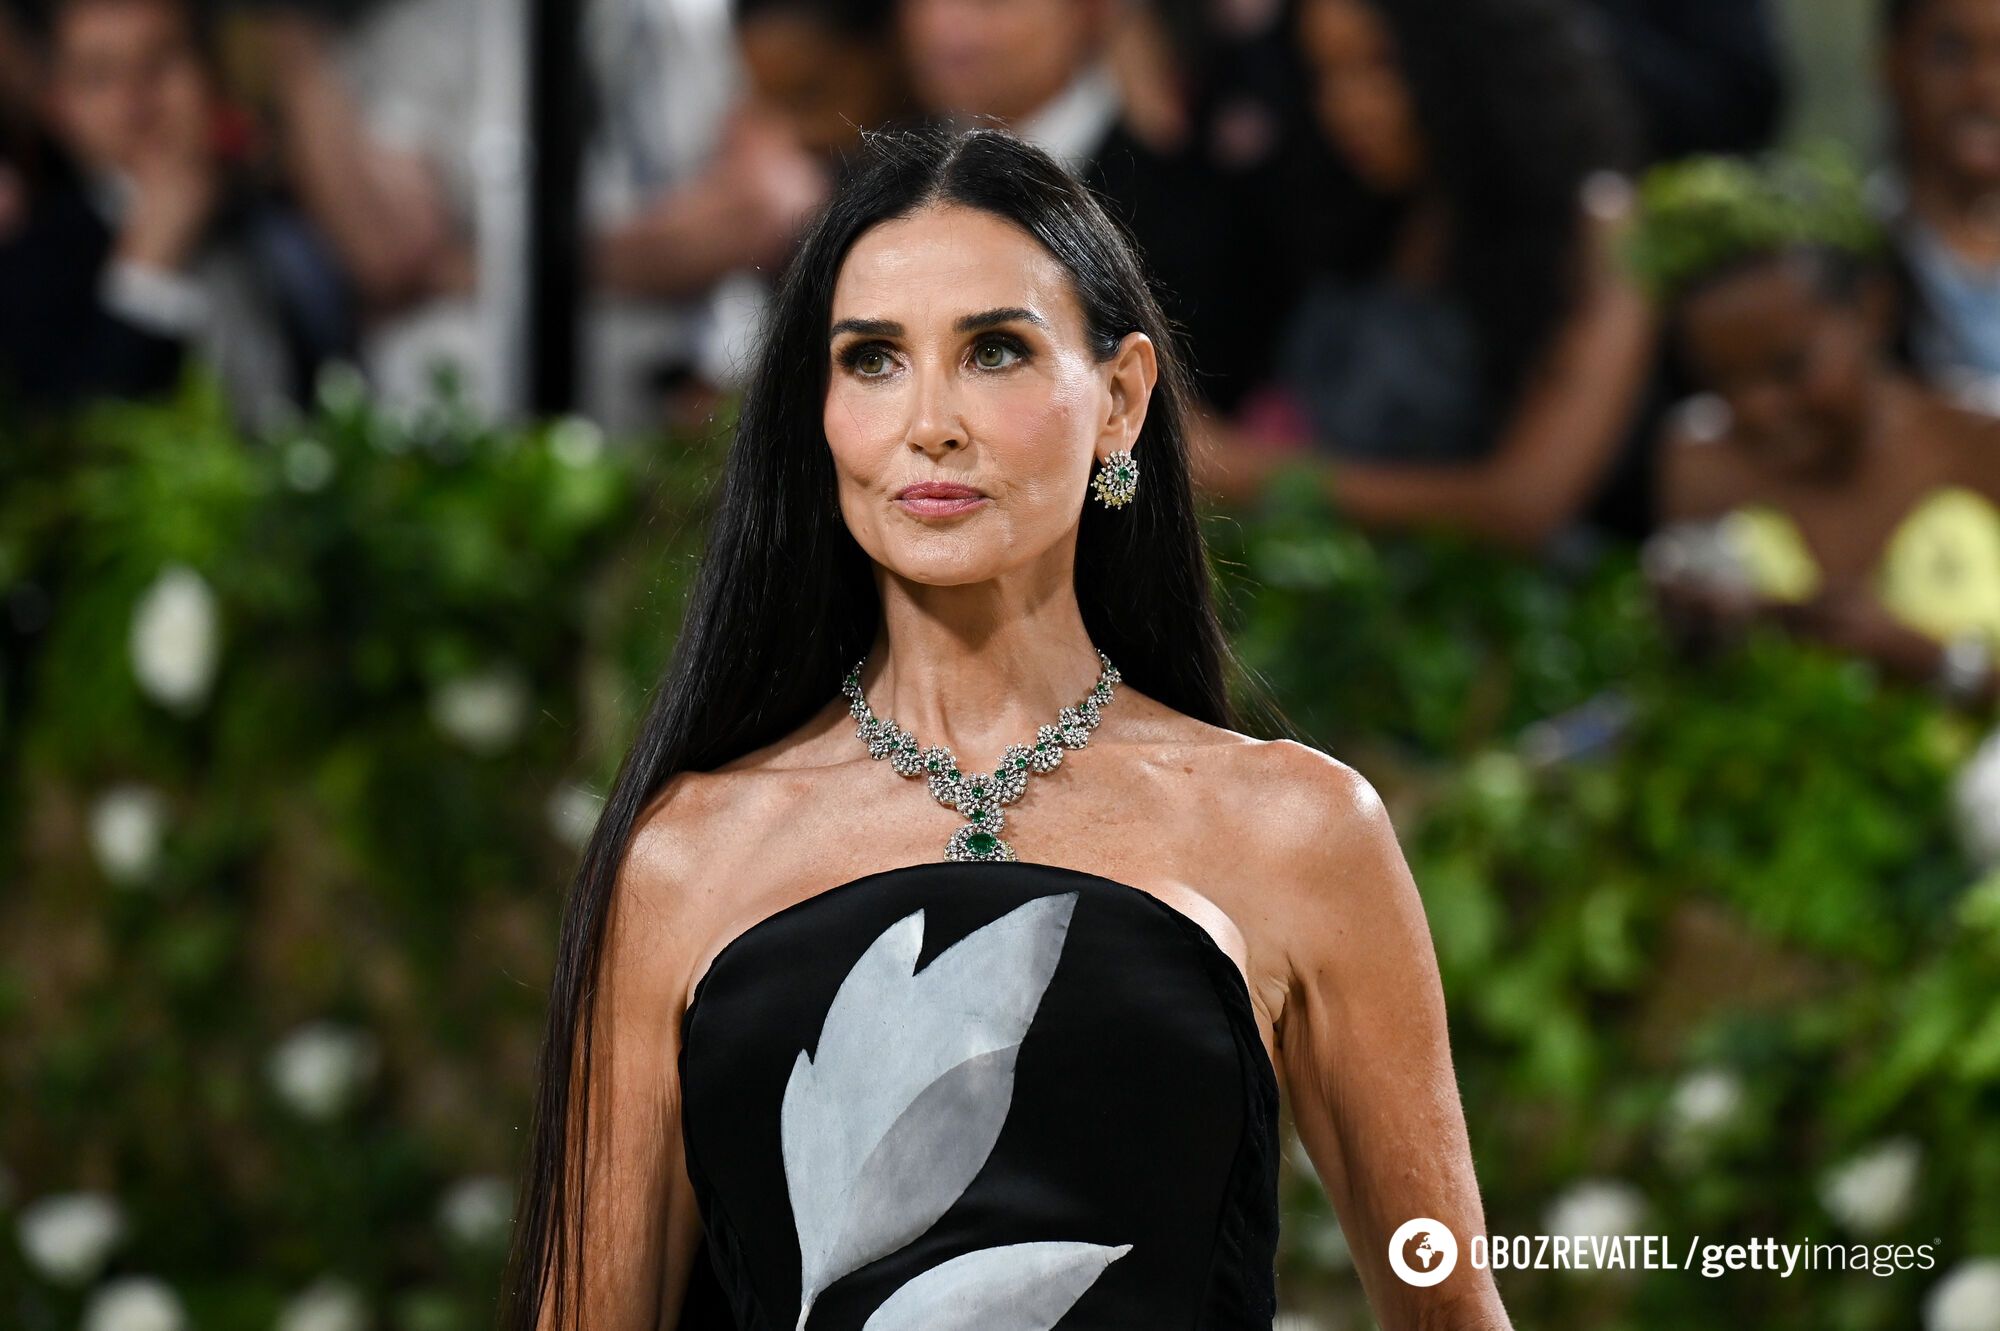 Demi Moore, 61, suspected of an affair with singer Joe Jonas, who is 27 years younger